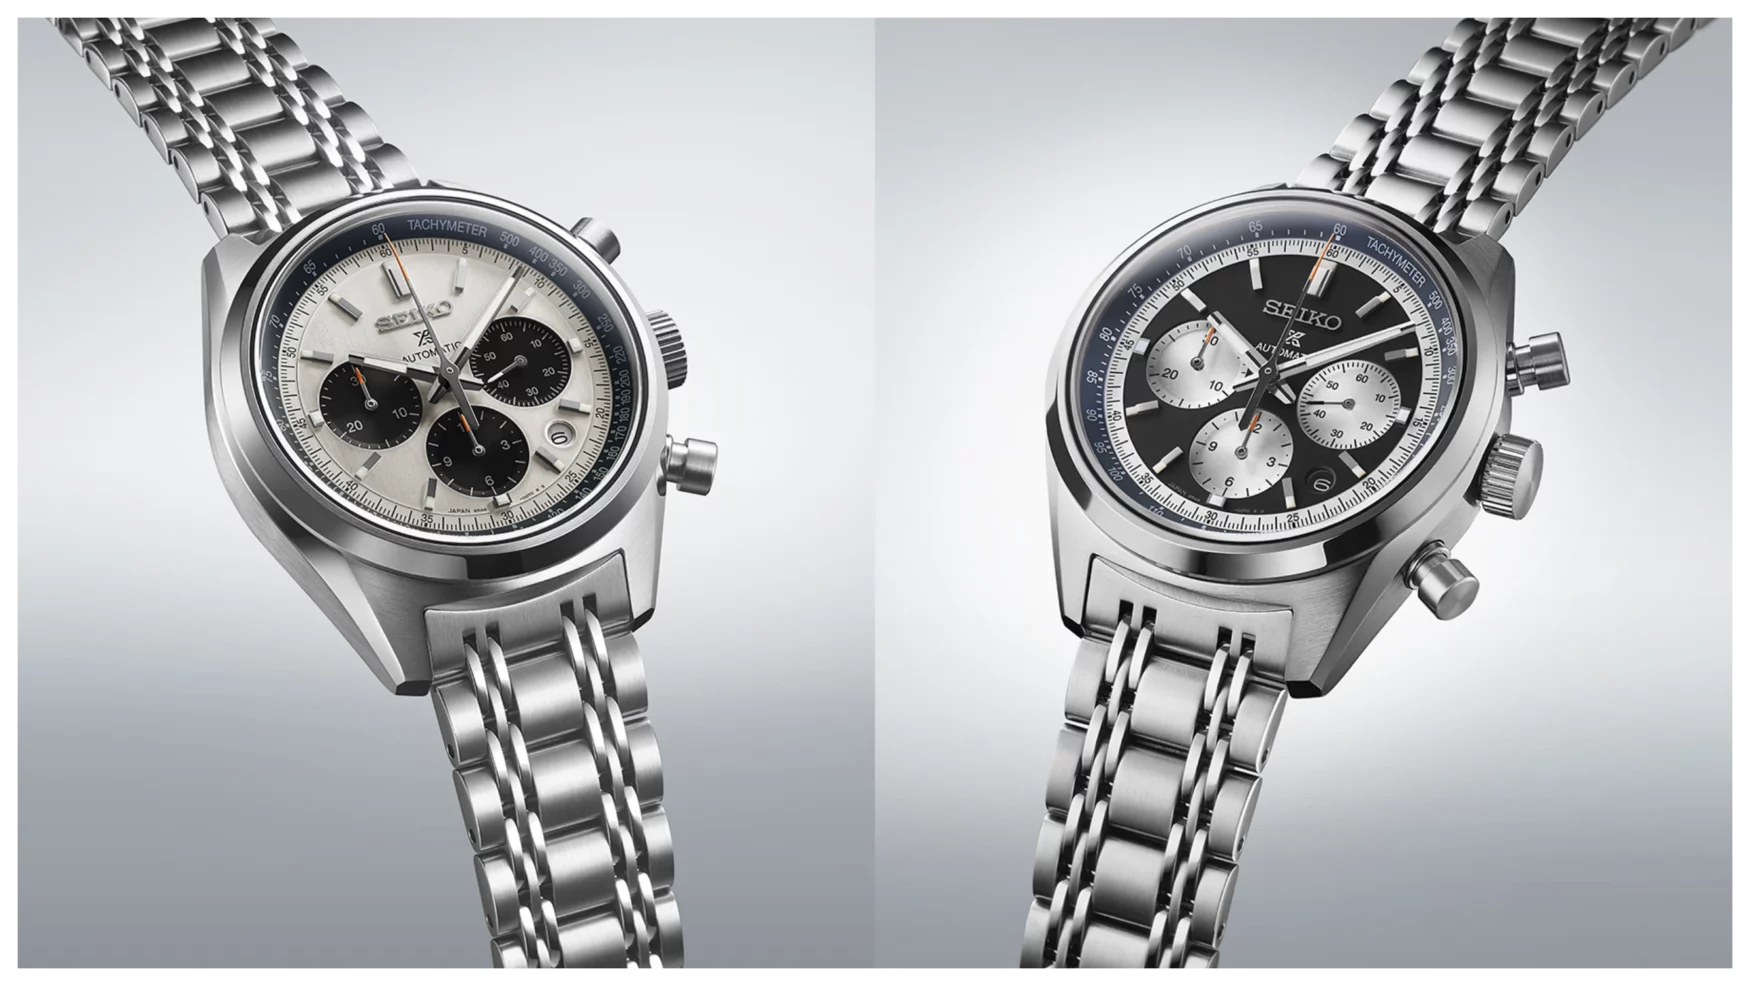 Seiko launches two panda-flavoured Speedtimer chronographs inspired by a 1972 design